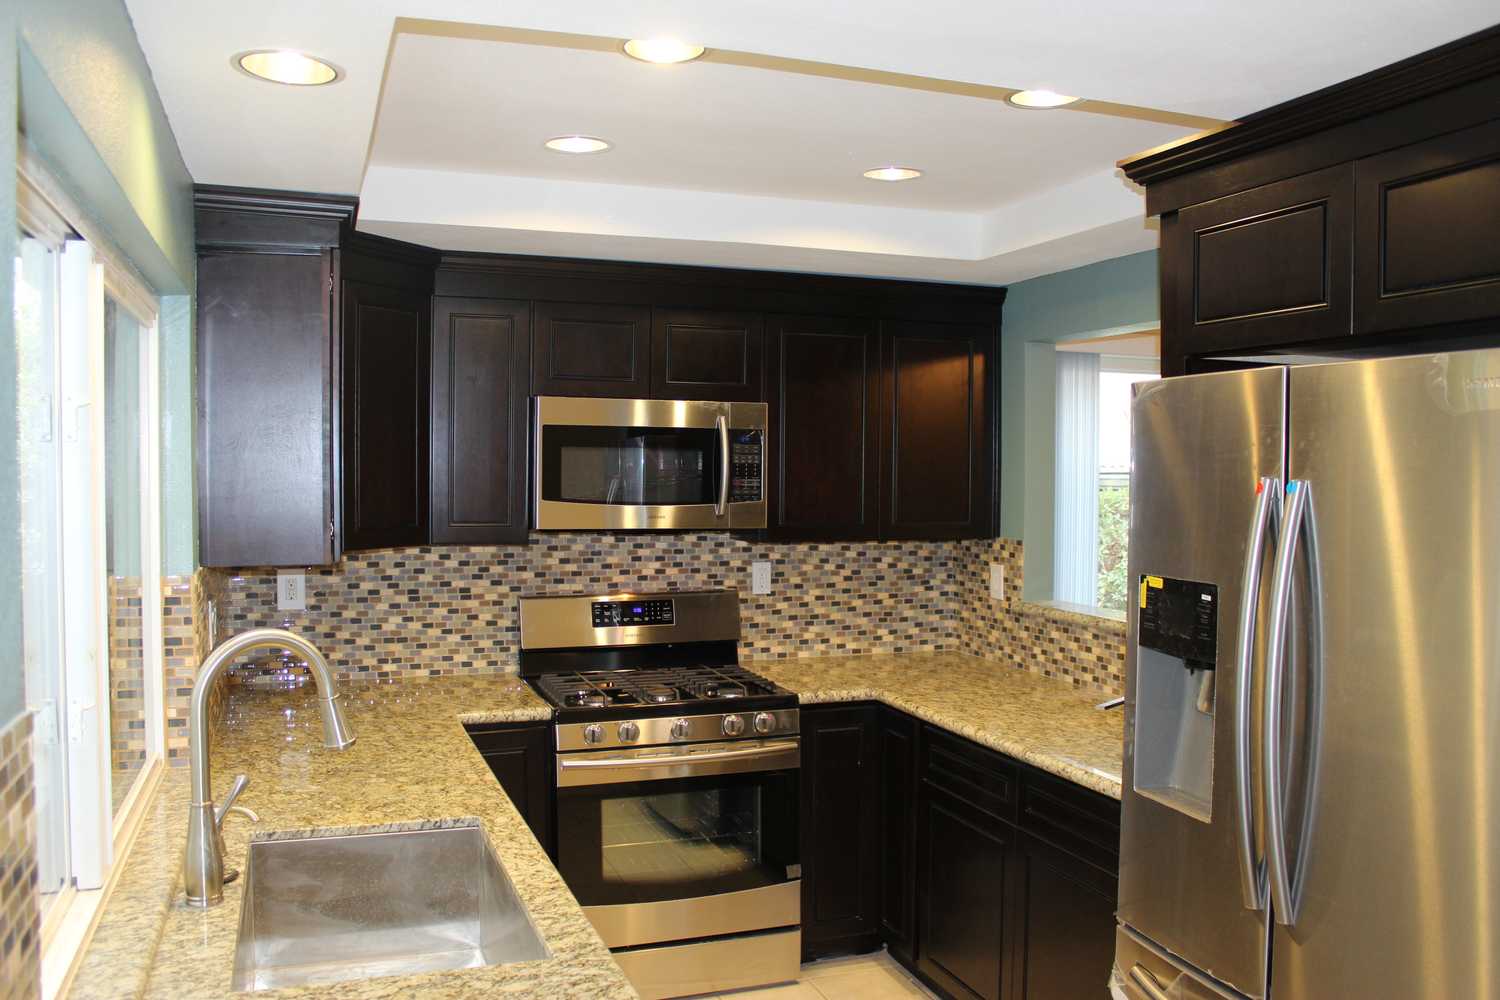 Project photos from Kitchen Remodeler - LA